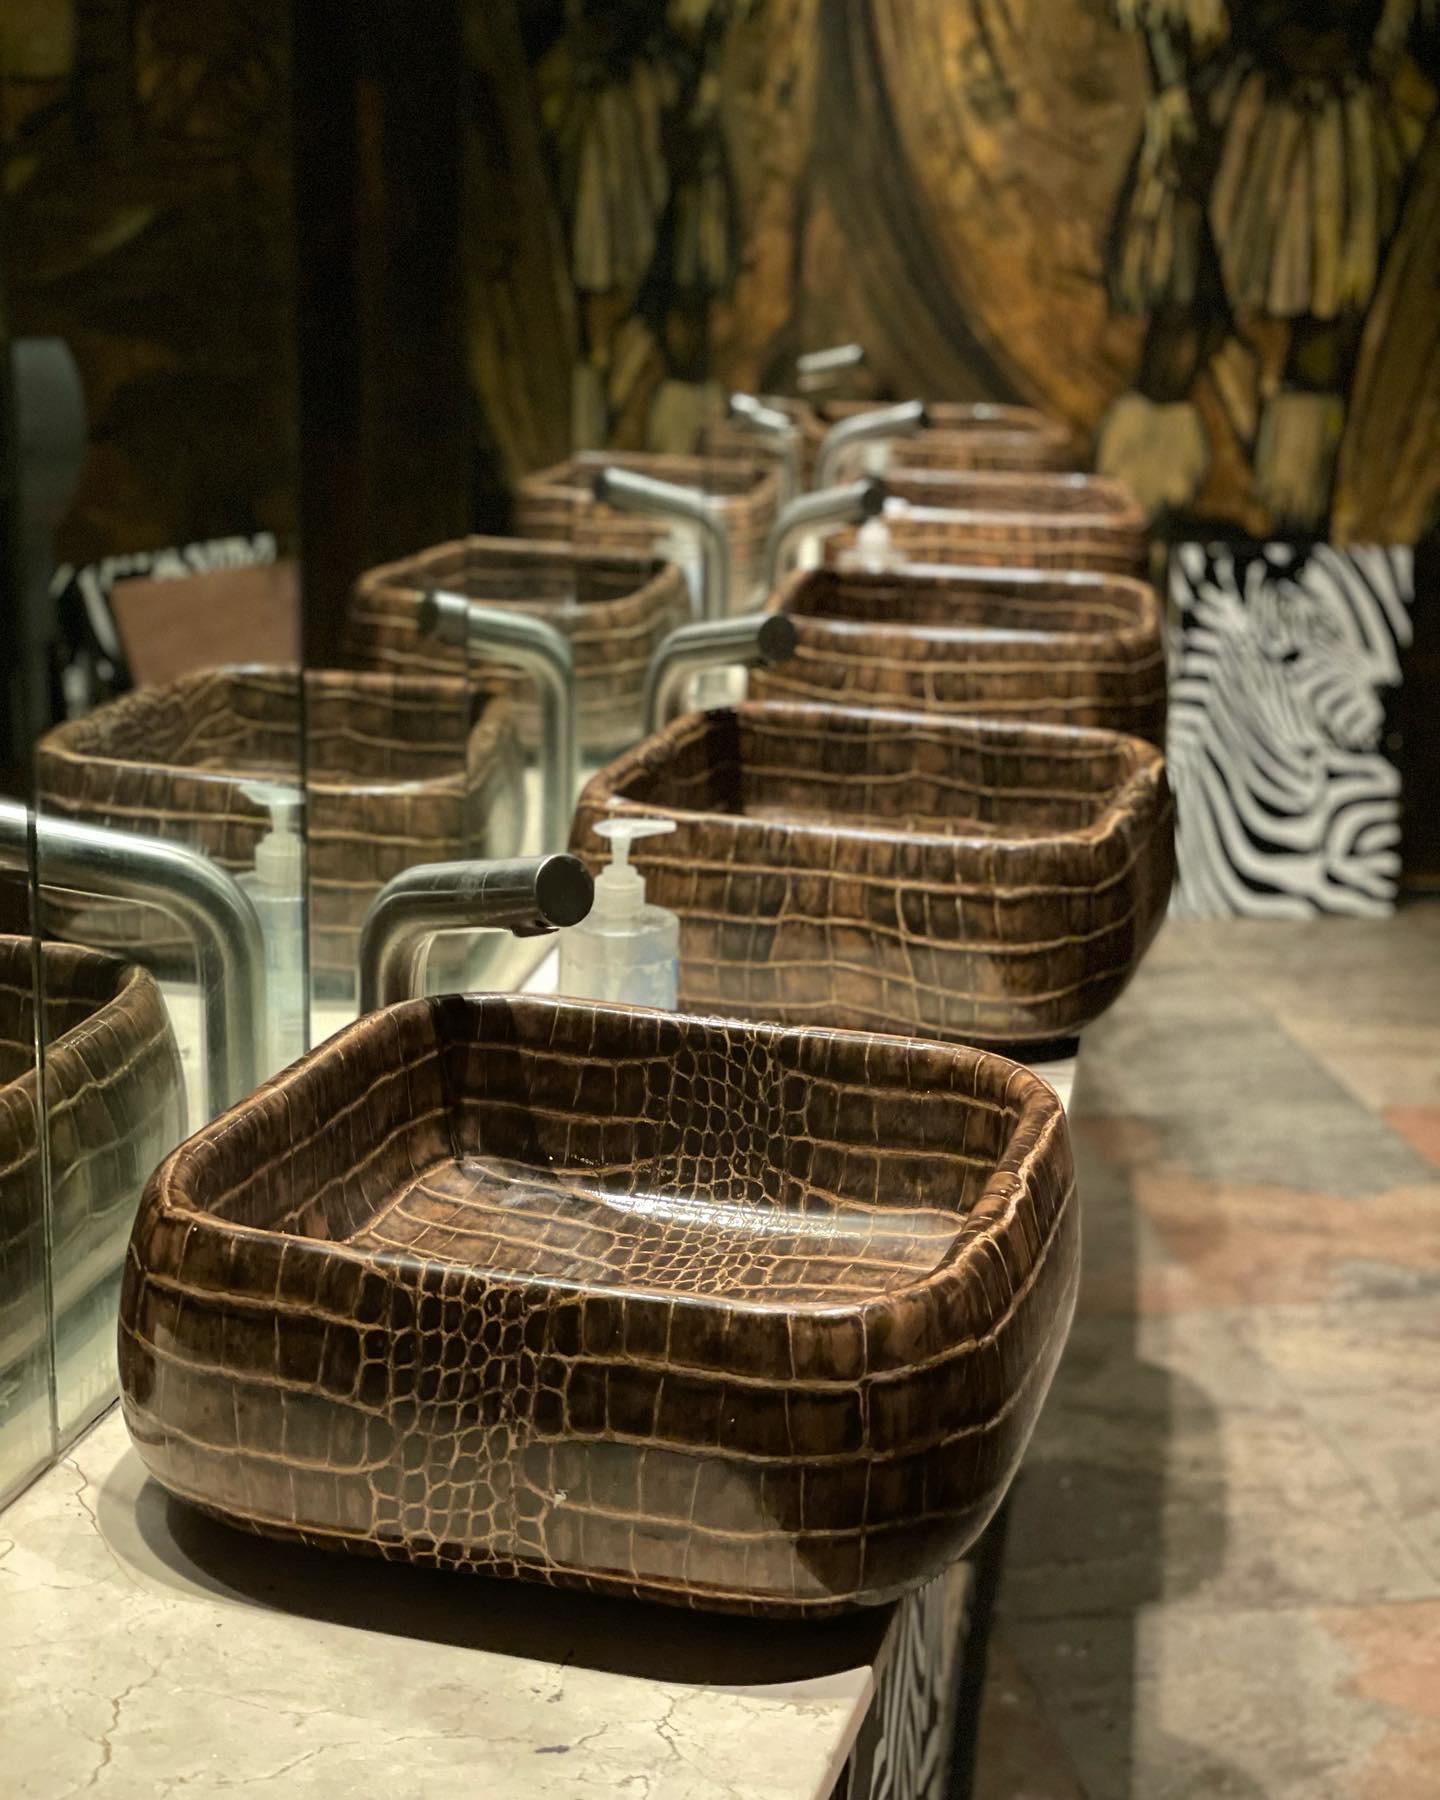 We have been lucky enough to acquire x13 of these Bespoke Faux snake skin ceramic sinks which were all commissioned for the largest South African these restaurant / night club in the world Shaka Zulu located in the famous Camden Market in the heart